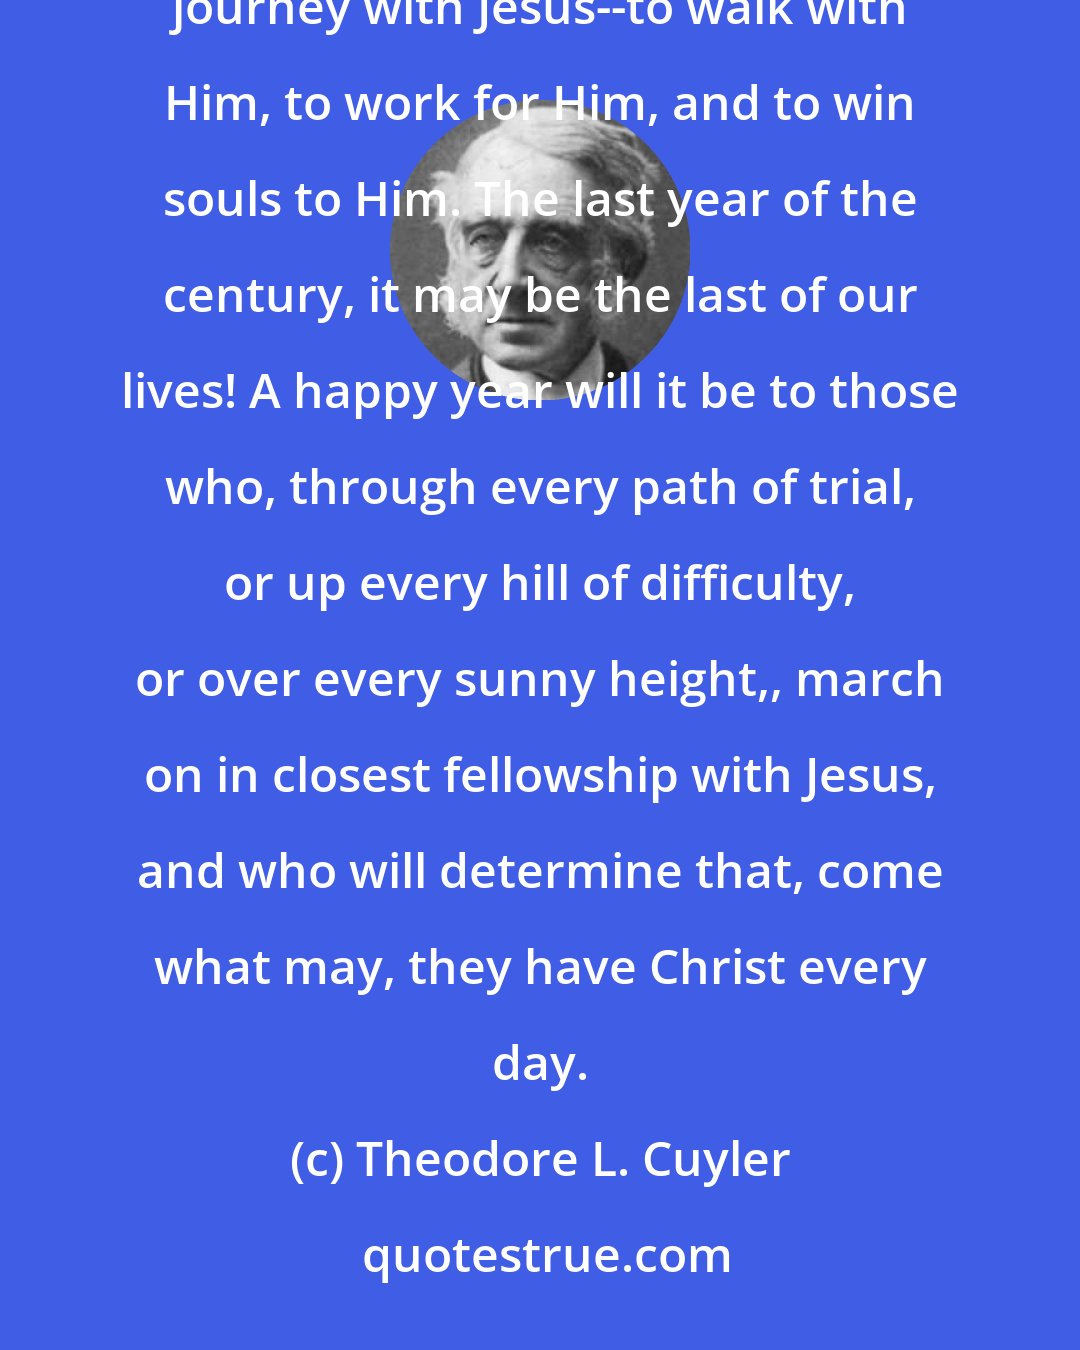 Theodore L. Cuyler: A new year is upon us, with new duties, new conflicts, new trials, and new opportunities. Start on the journey with Jesus--to walk with Him, to work for Him, and to win souls to Him. The last year of the century, it may be the last of our lives! A happy year will it be to those who, through every path of trial, or up every hill of difficulty, or over every sunny height,, march on in closest fellowship with Jesus, and who will determine that, come what may, they have Christ every day.